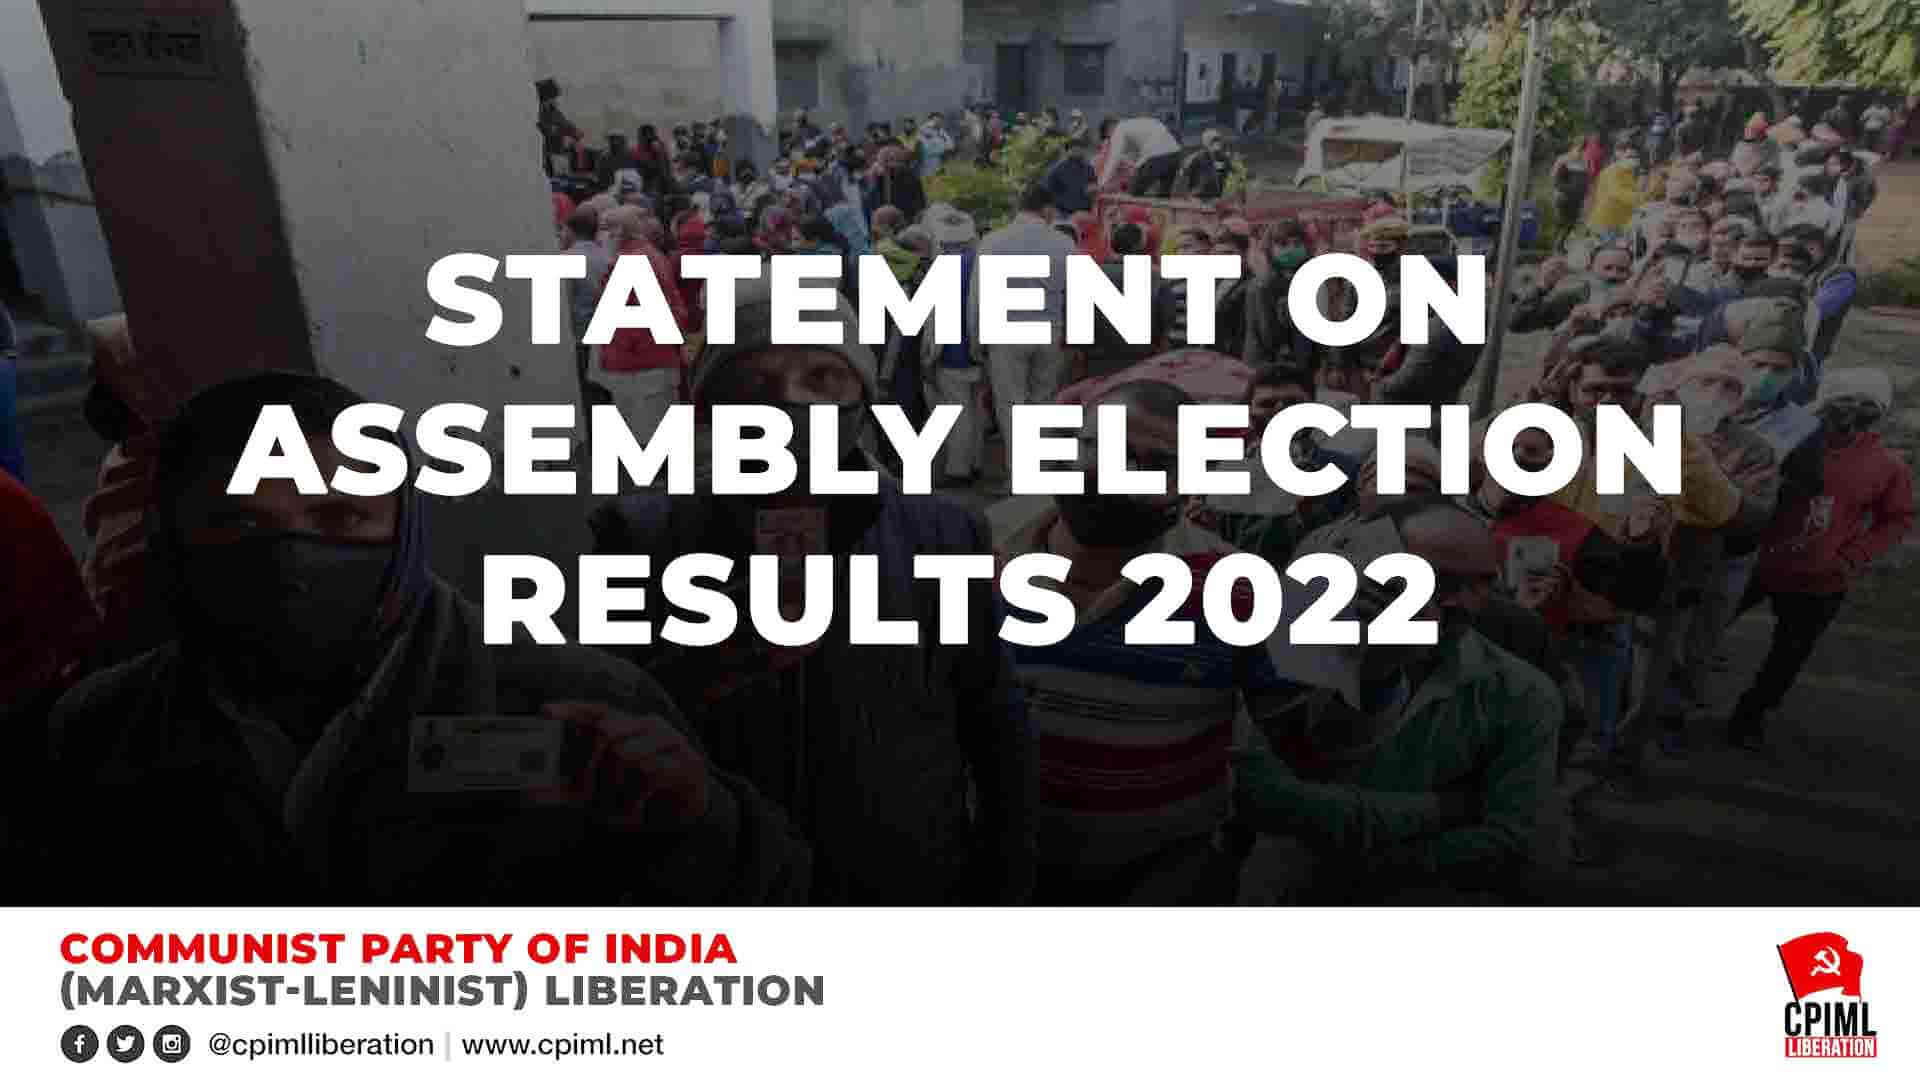 Statement on Assembly Election Results 